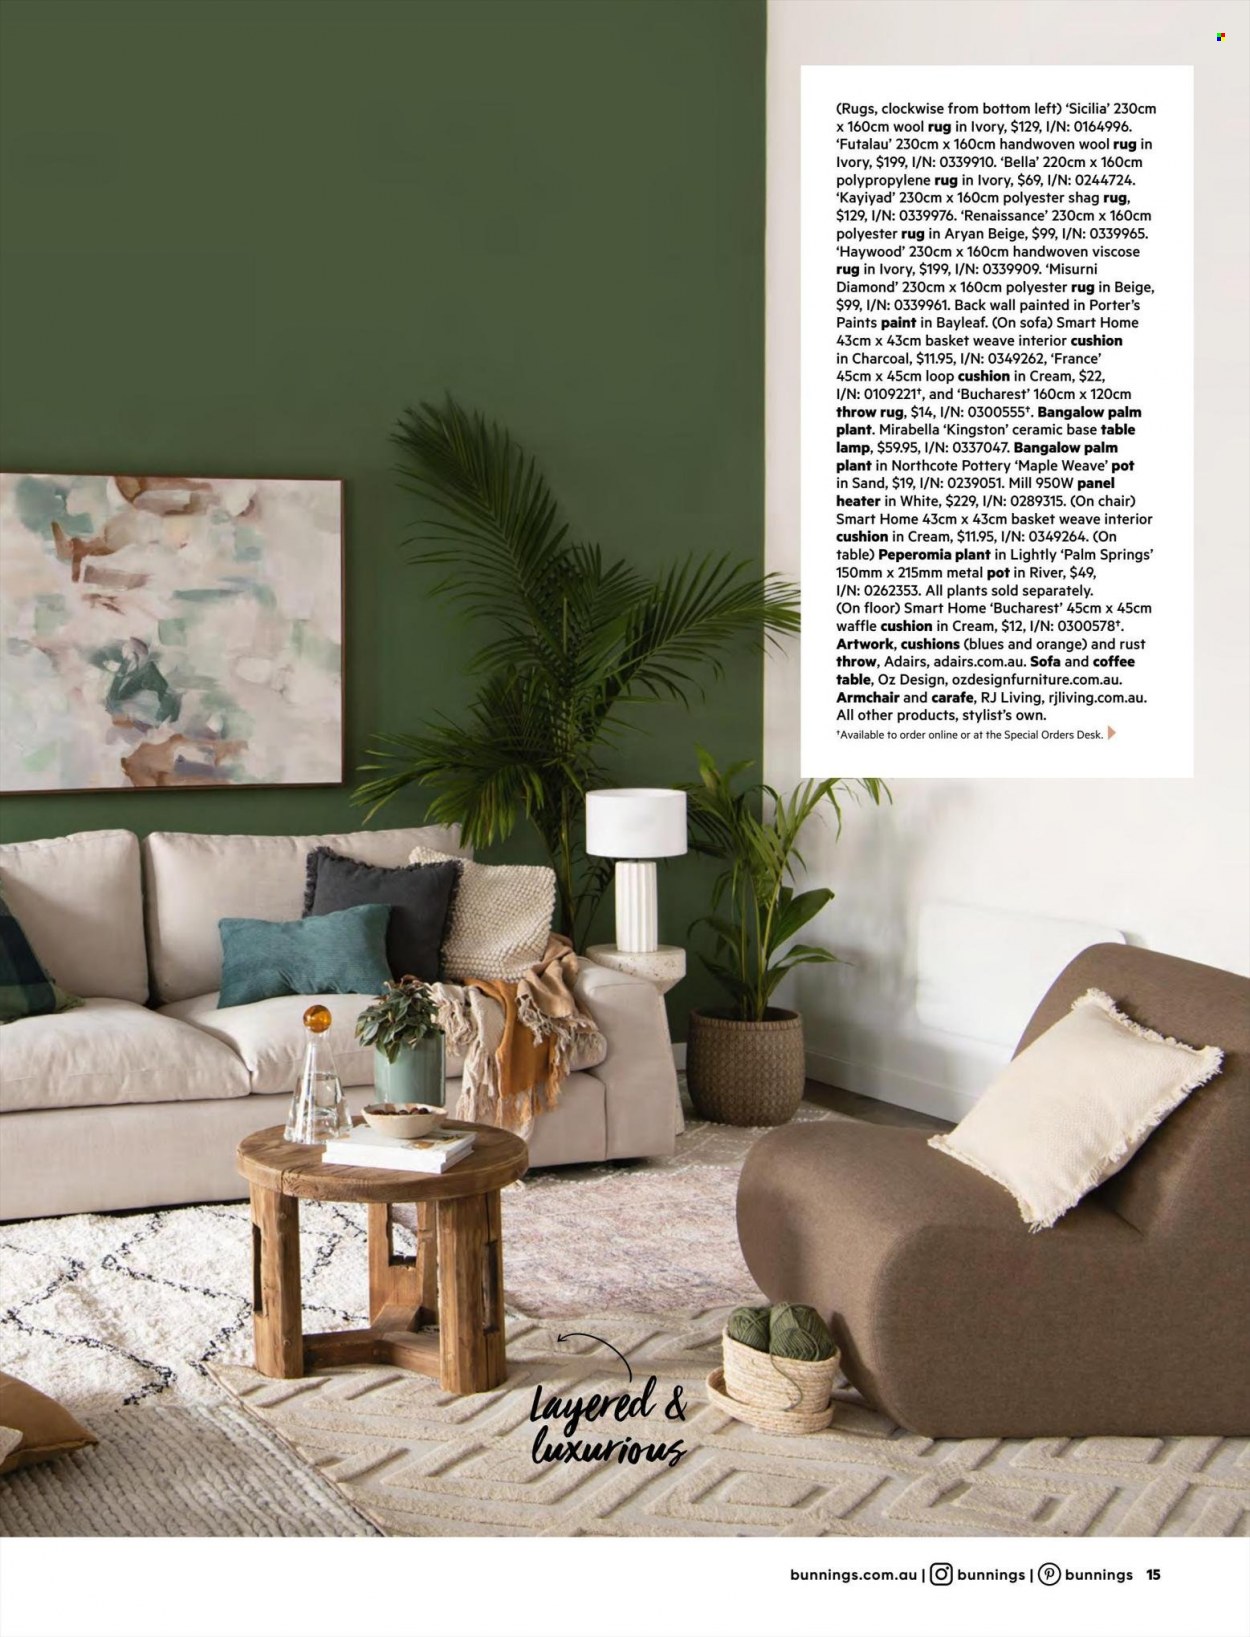 thumbnail - Bunnings Warehouse Catalogue - 1 May 2022 - 30 Jun 2022 - Sales products - chair, arm chair, sofa, coffee table, desk, cushion, bijzettafel, pot, paint, lamp, table lamp, heater, rug, wool rug. Page 15.